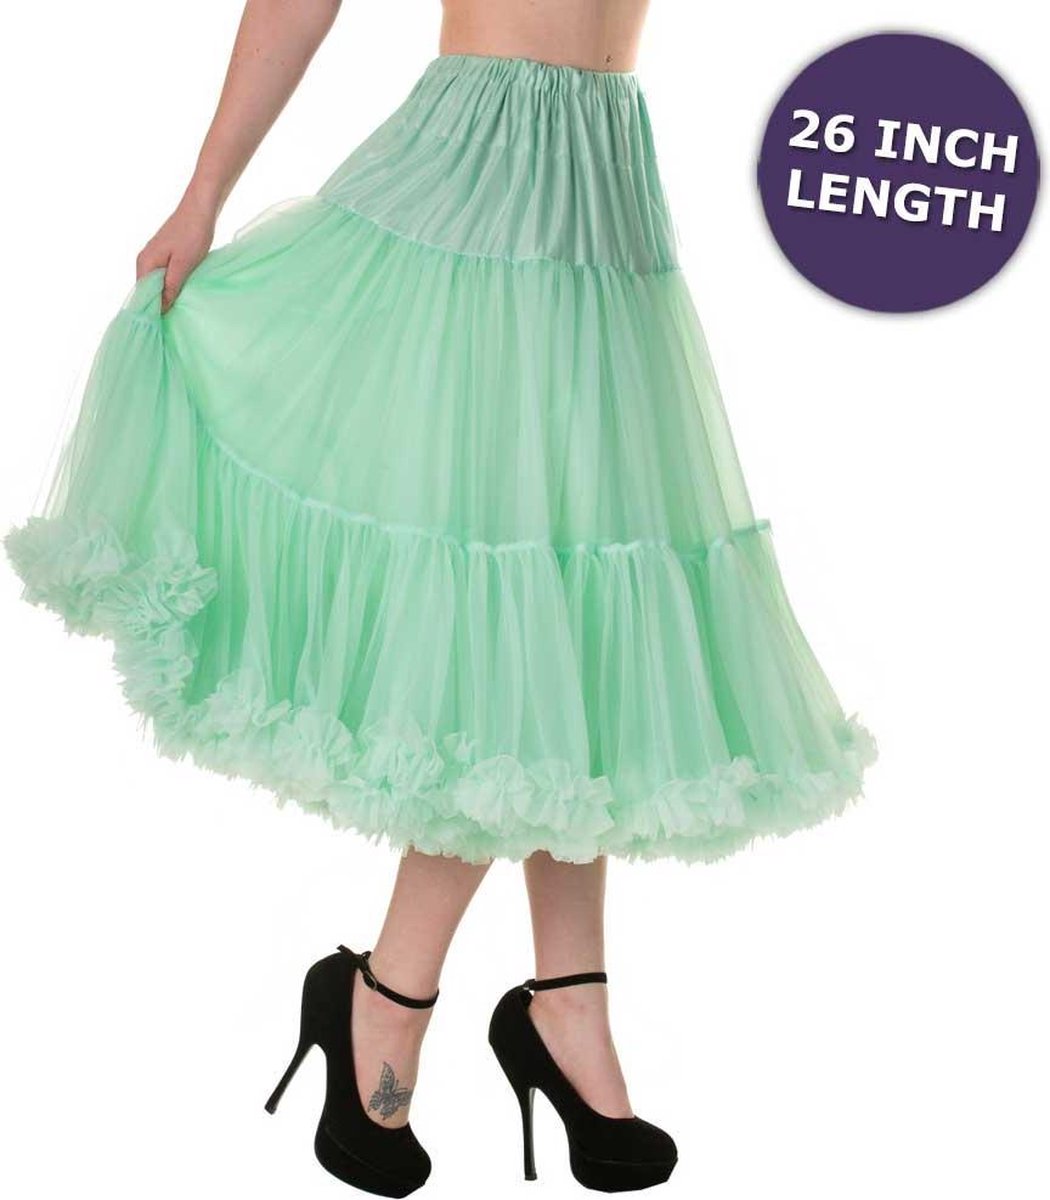 Banned - Lifeforms Petticoat - 26 inch - M/L - Groen